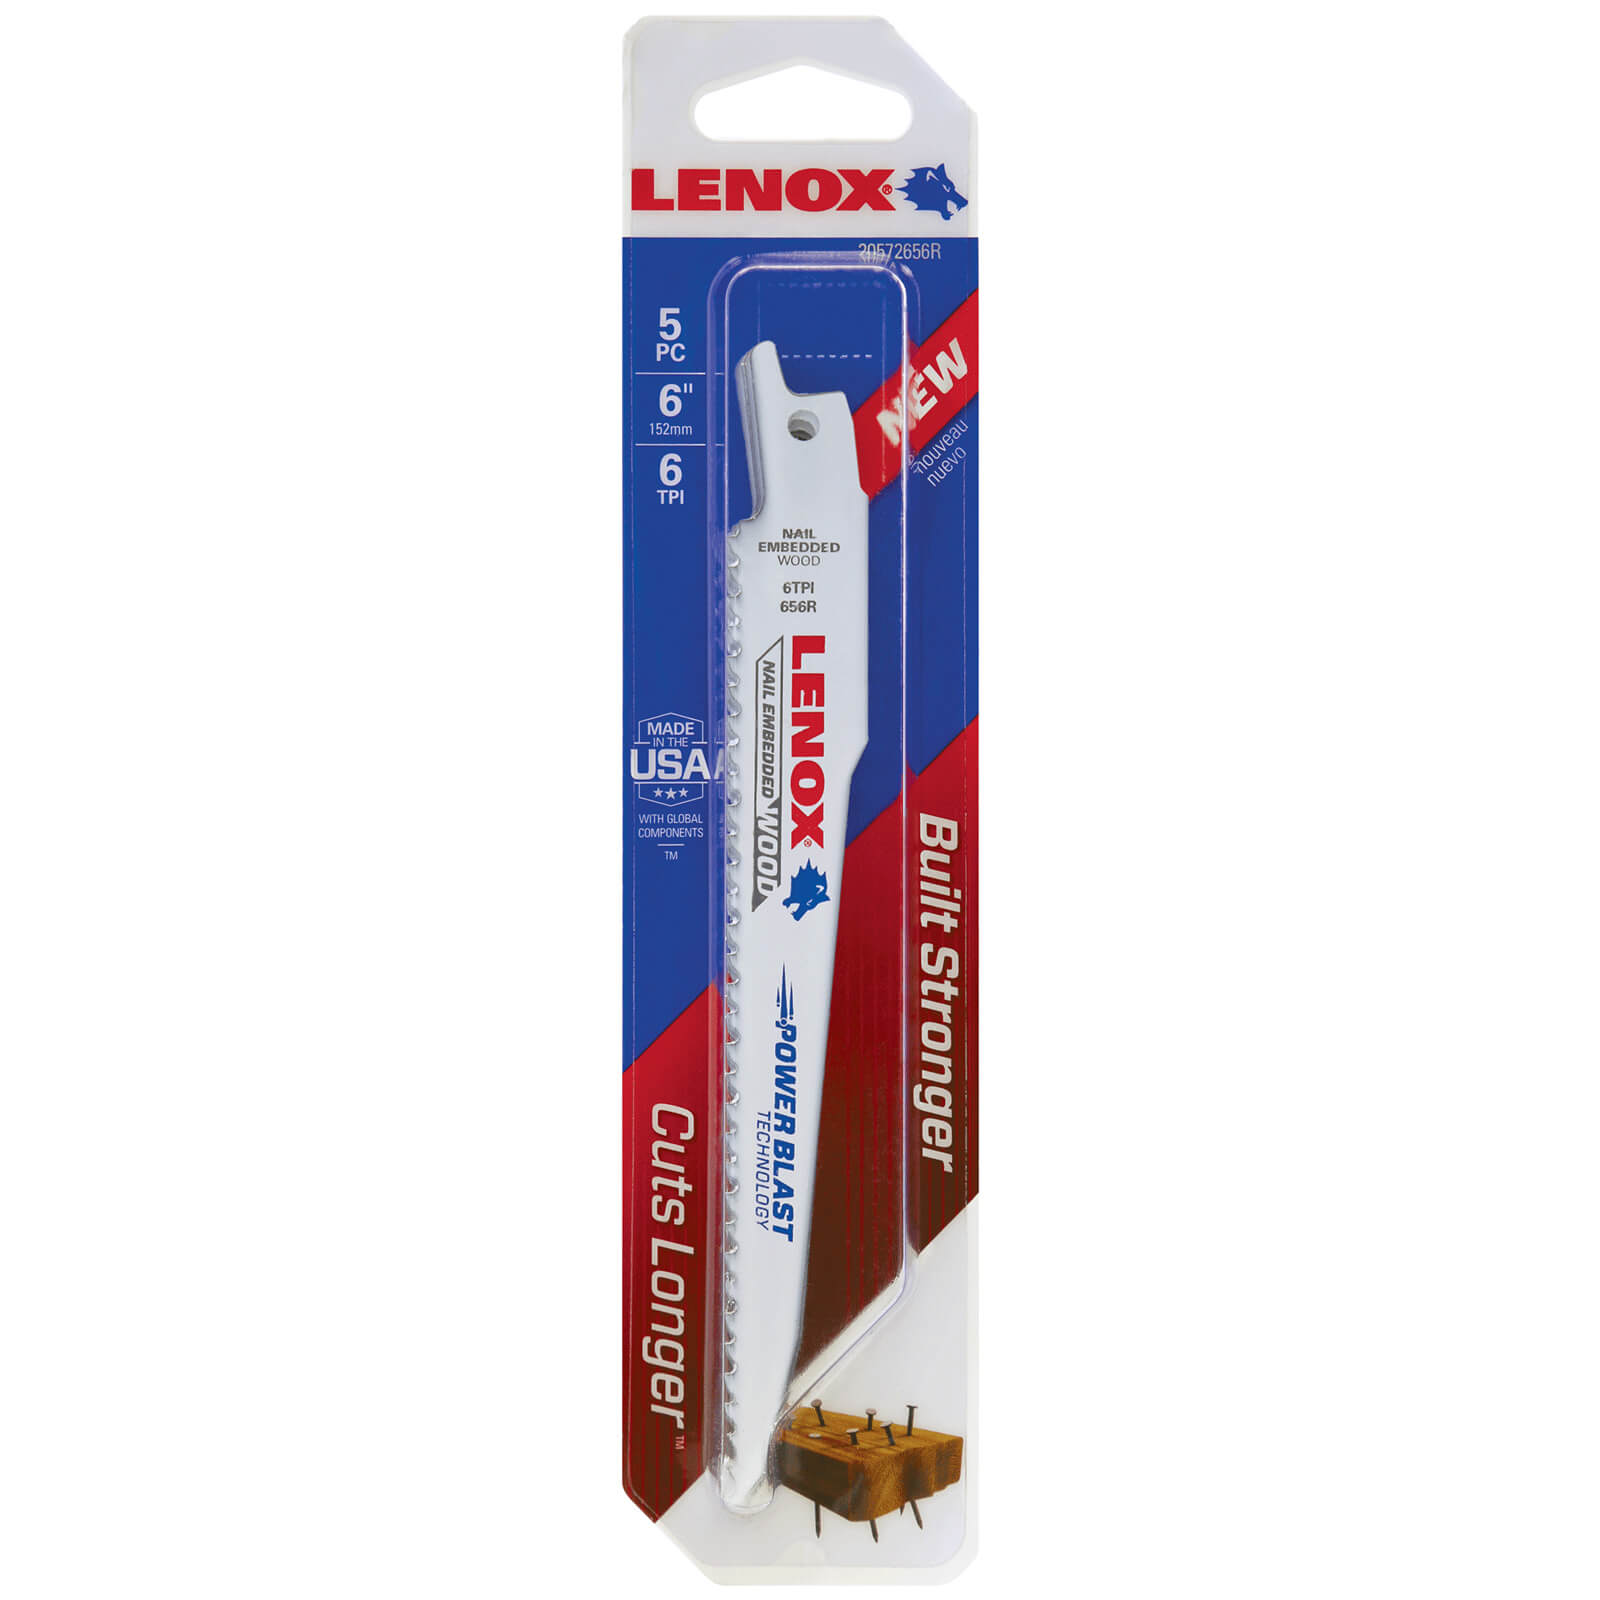 Photo of Lenox 6tpi Nail Embedded Wood Cutting Reciprocating Saw Blades 152mm Pack Of 5